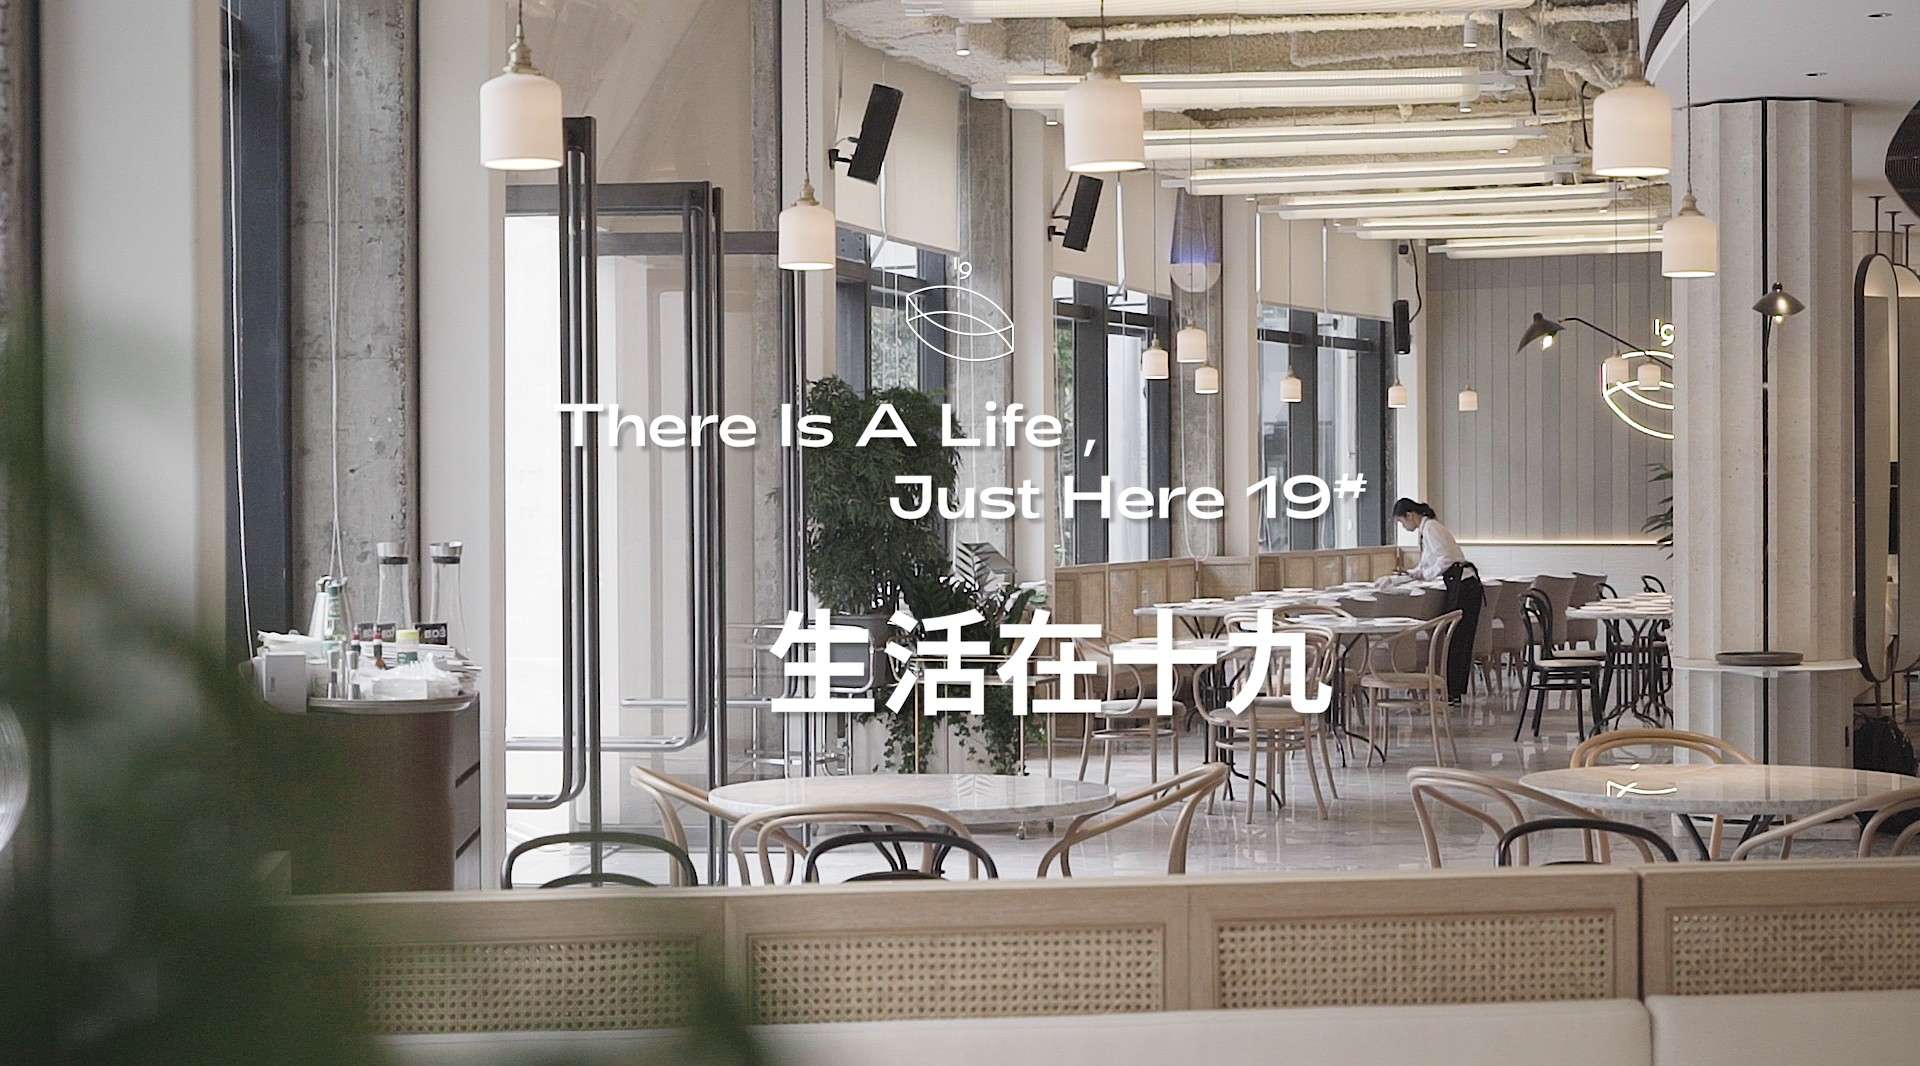 There is A Life Just Here 19 # 生活在十九